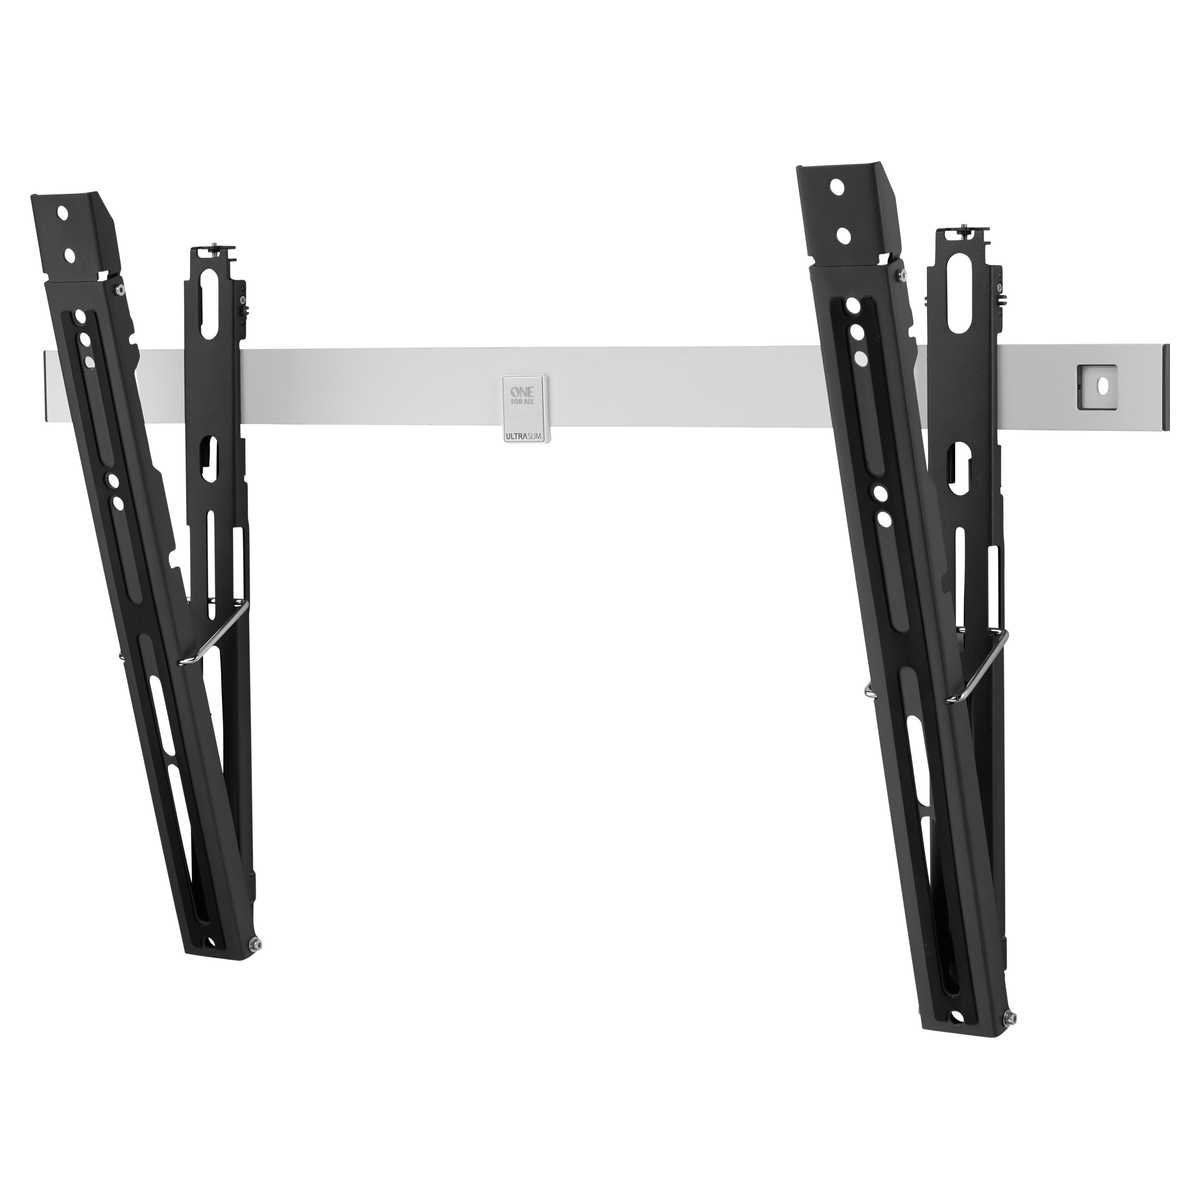 Image of One For All UE-WM6621 Ultra Slim Tilt Wall Mount for 32 to 90 Inch TVs